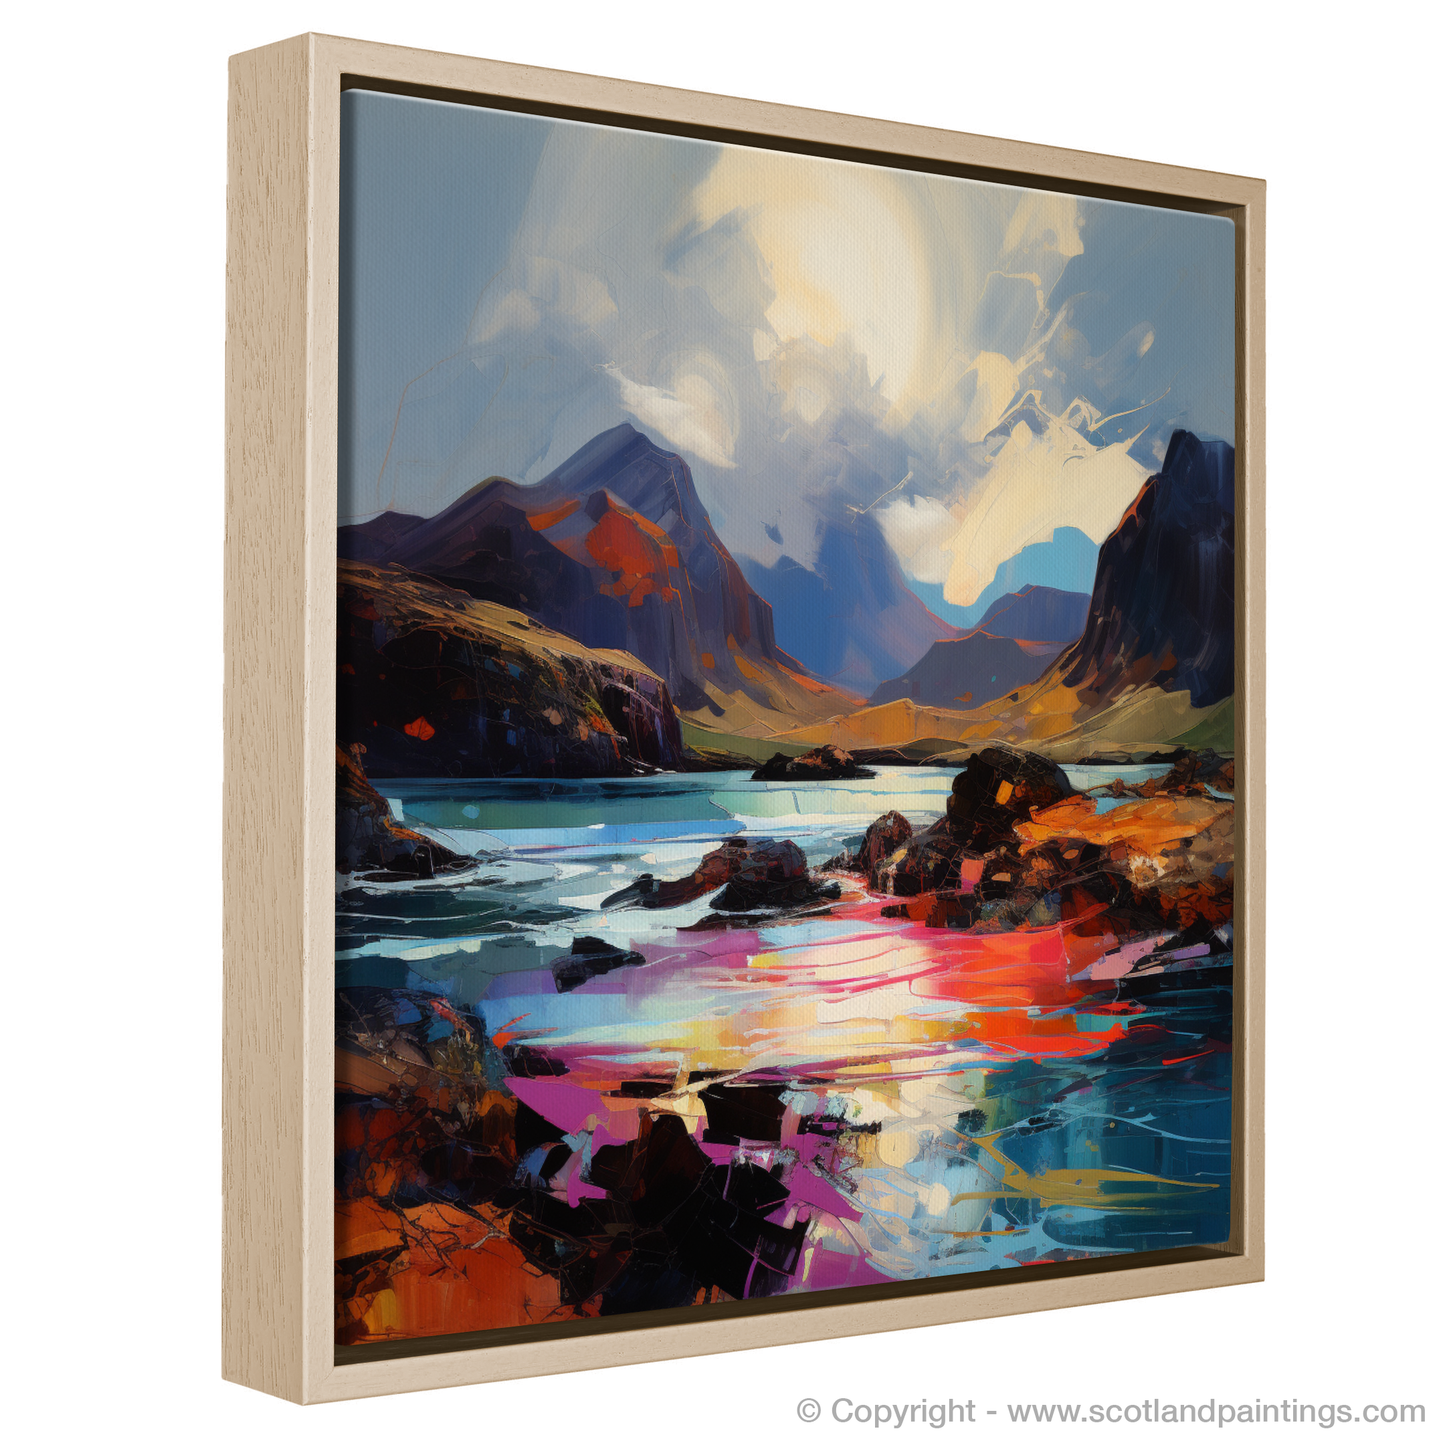 Painting and Art Print of Isle of Rum, Inner Hebrides. Isle of Rum Dreamscape: An Expressionist Ode to Scotland's Wild Terrain.